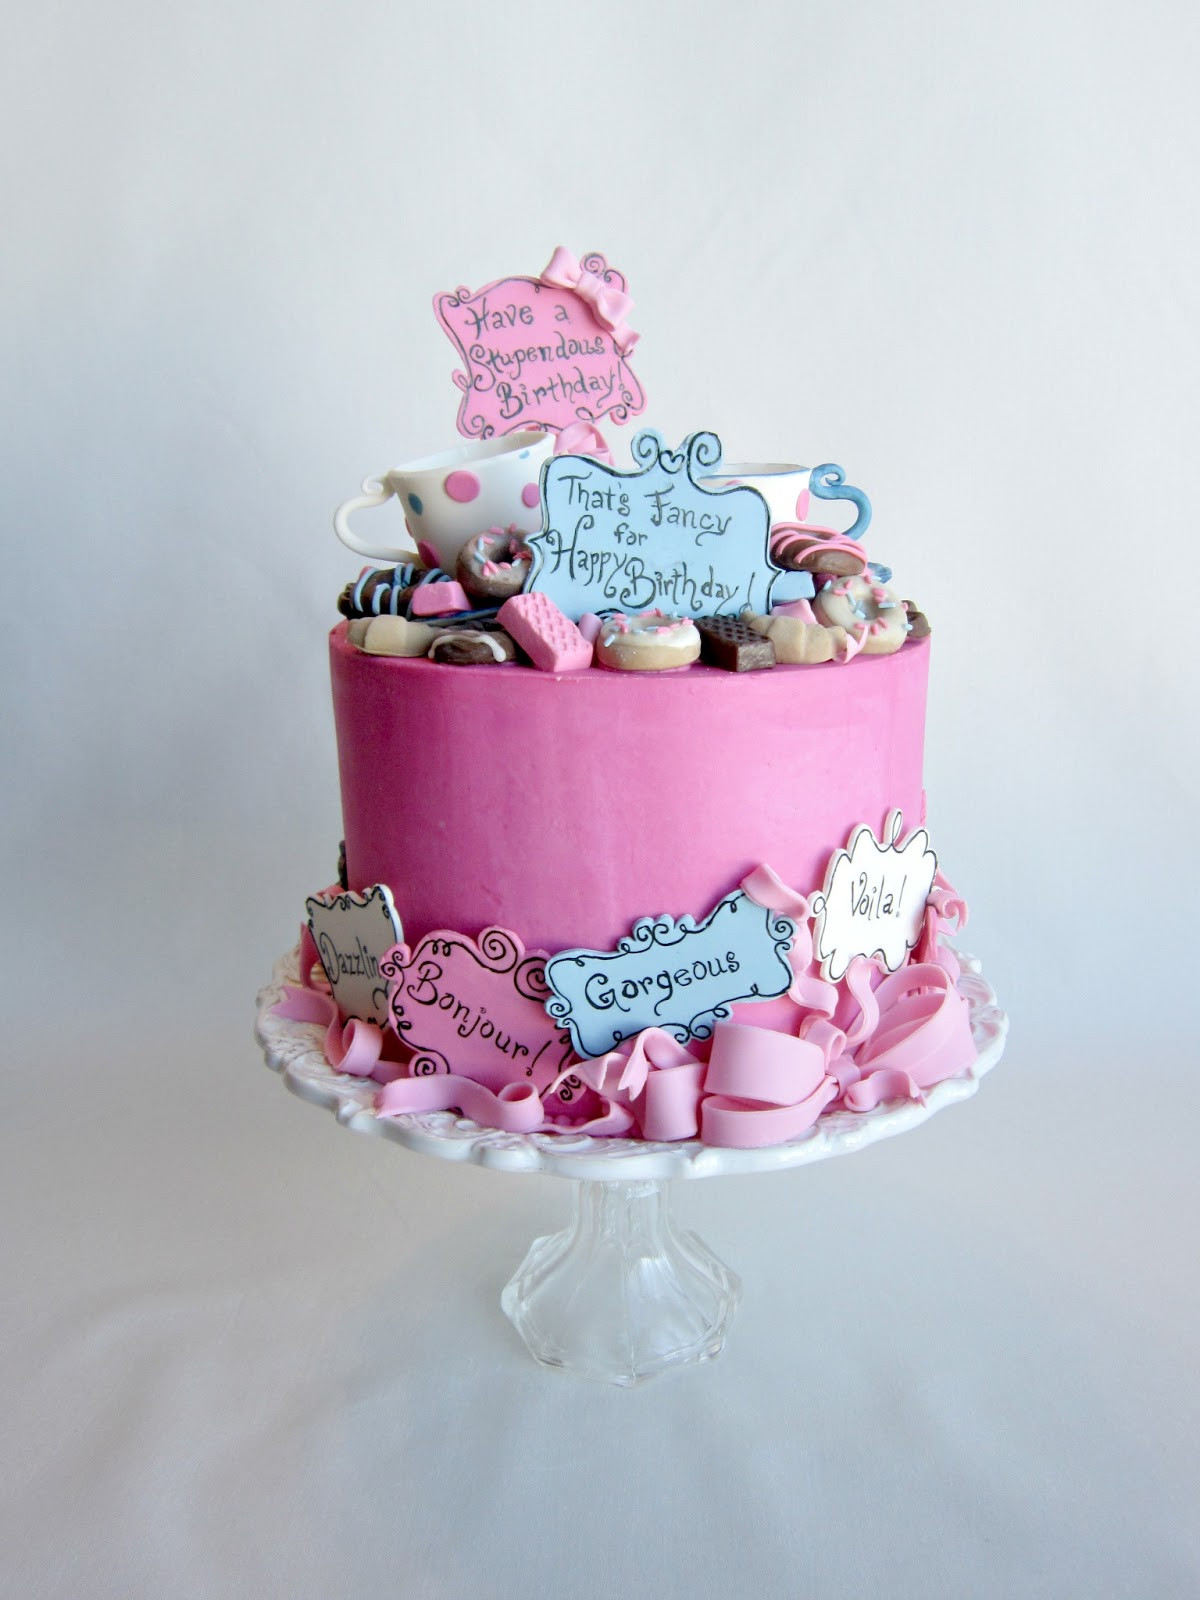 Fancy Birthday Cake
 Delectable Cakes Most Stupendous Fancy Nancy Birthday Cake